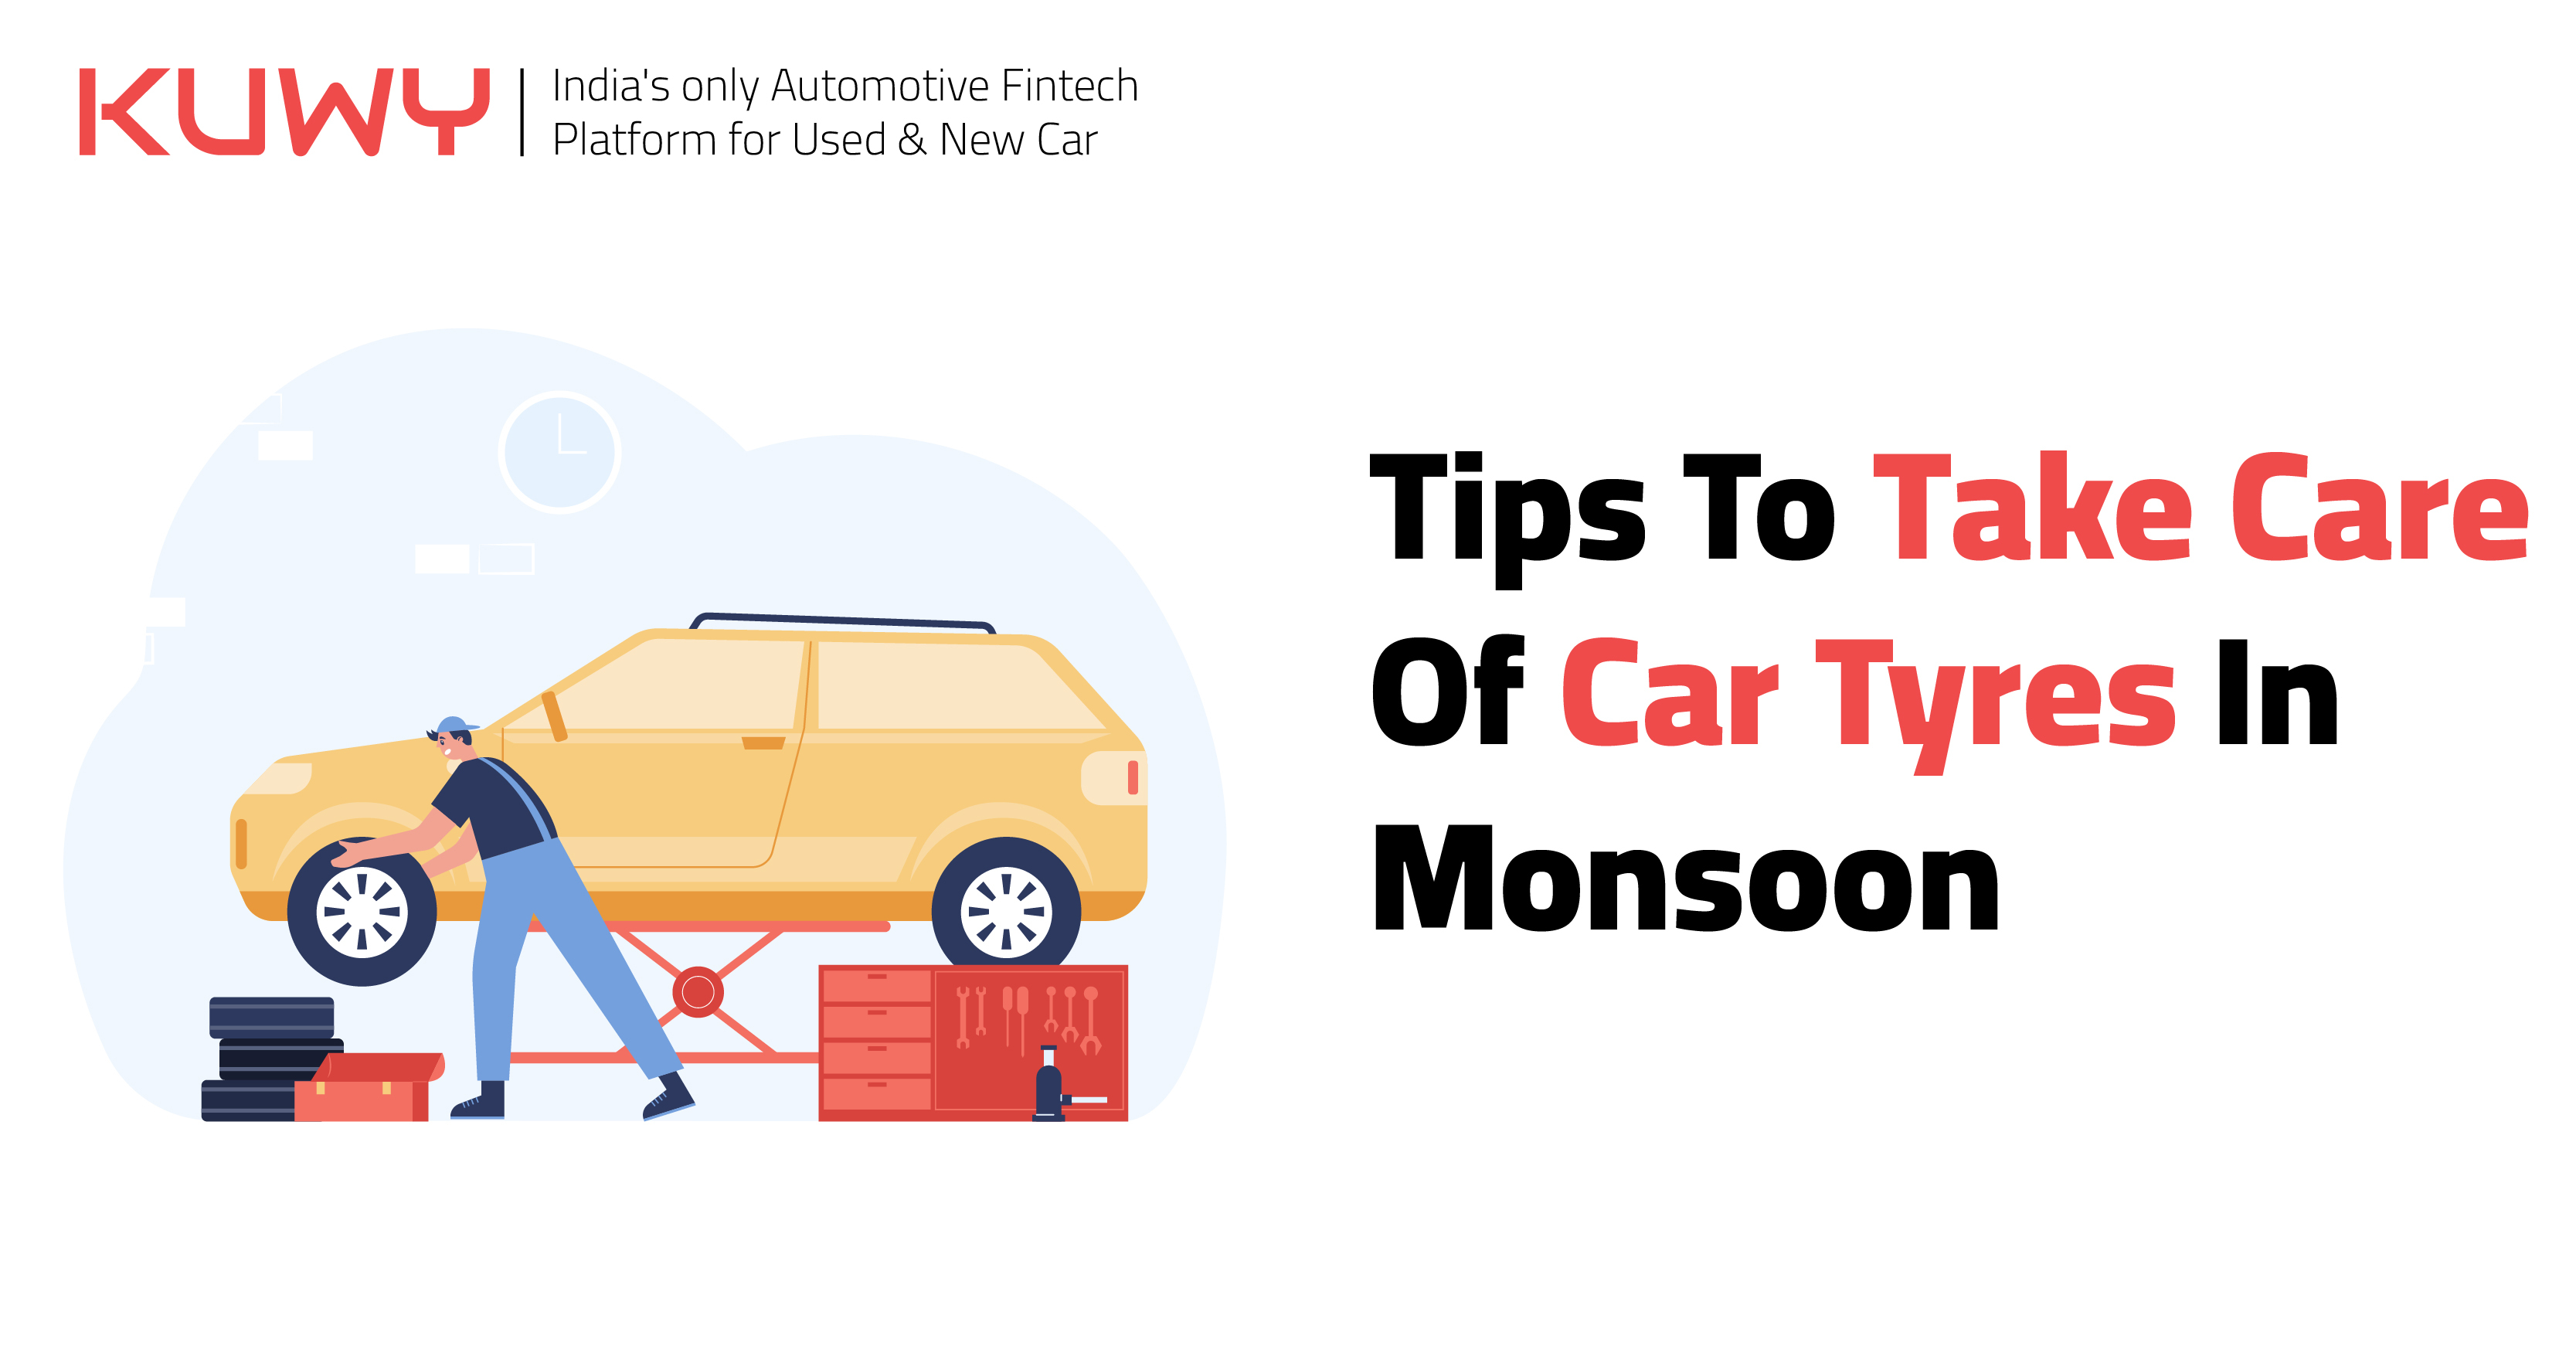 Must-Know Tips to Take Care of Car Tyres in Monsoon